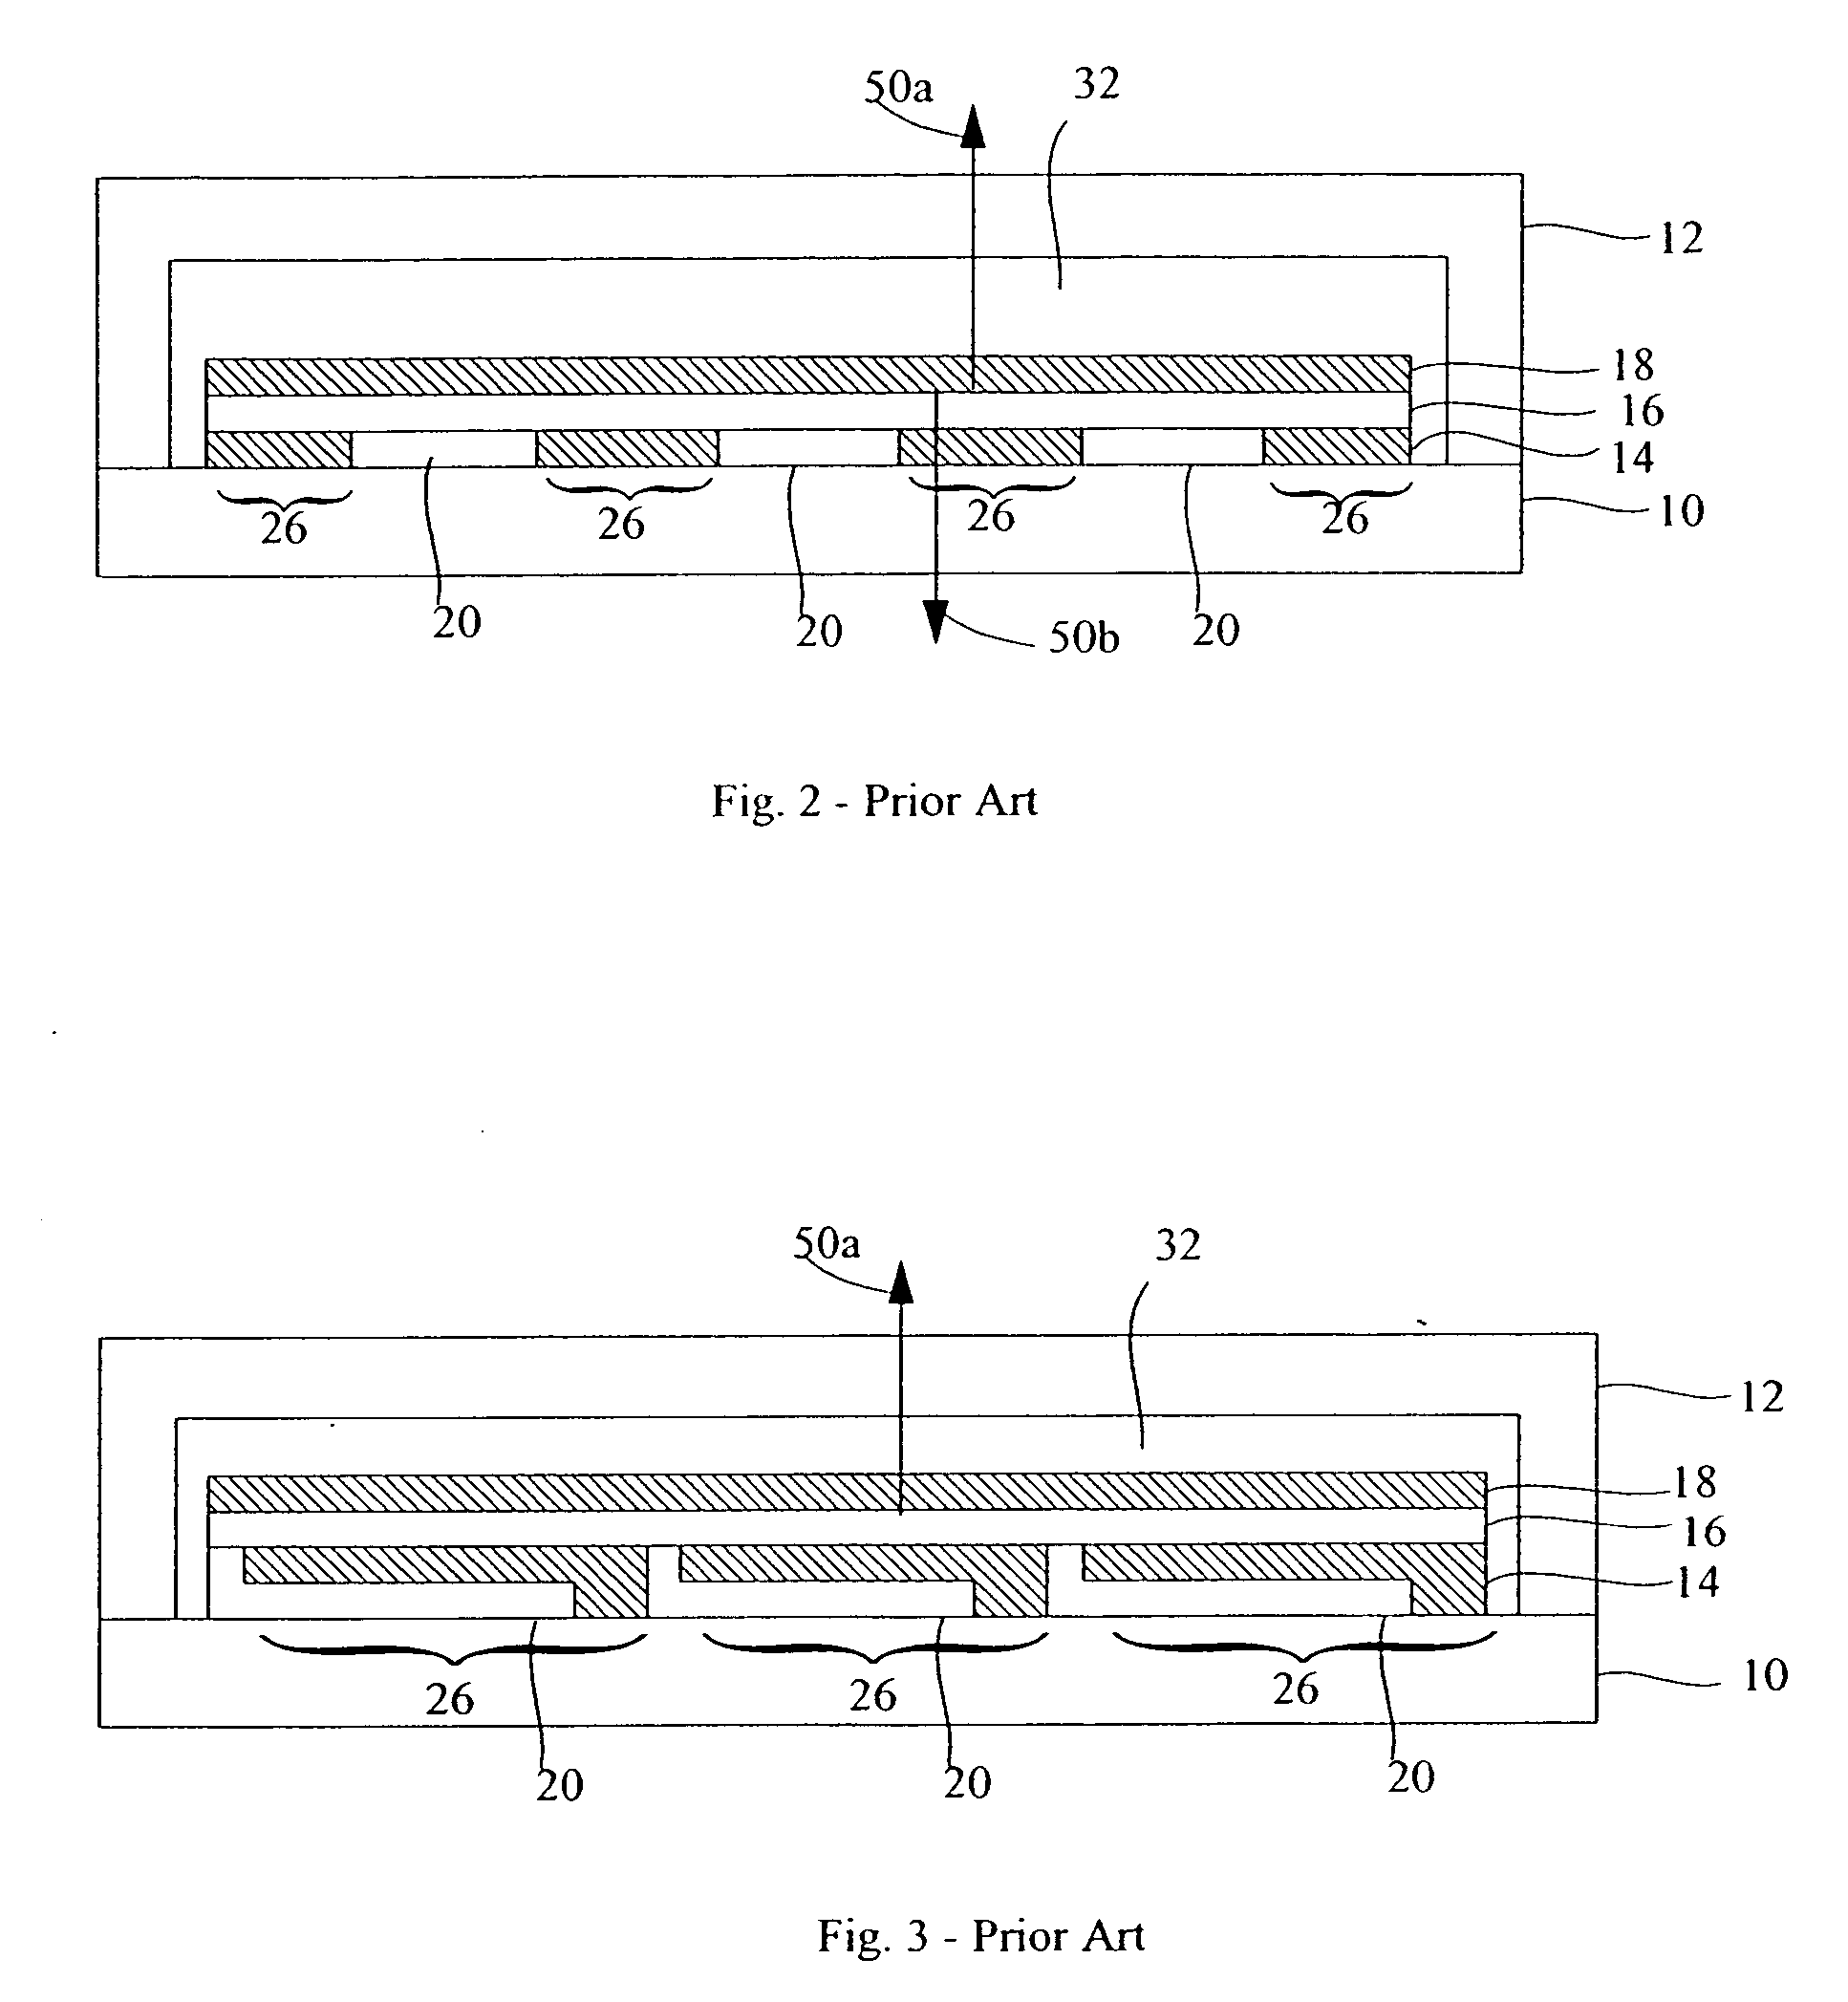 OLED device with improved efficiency and robustness